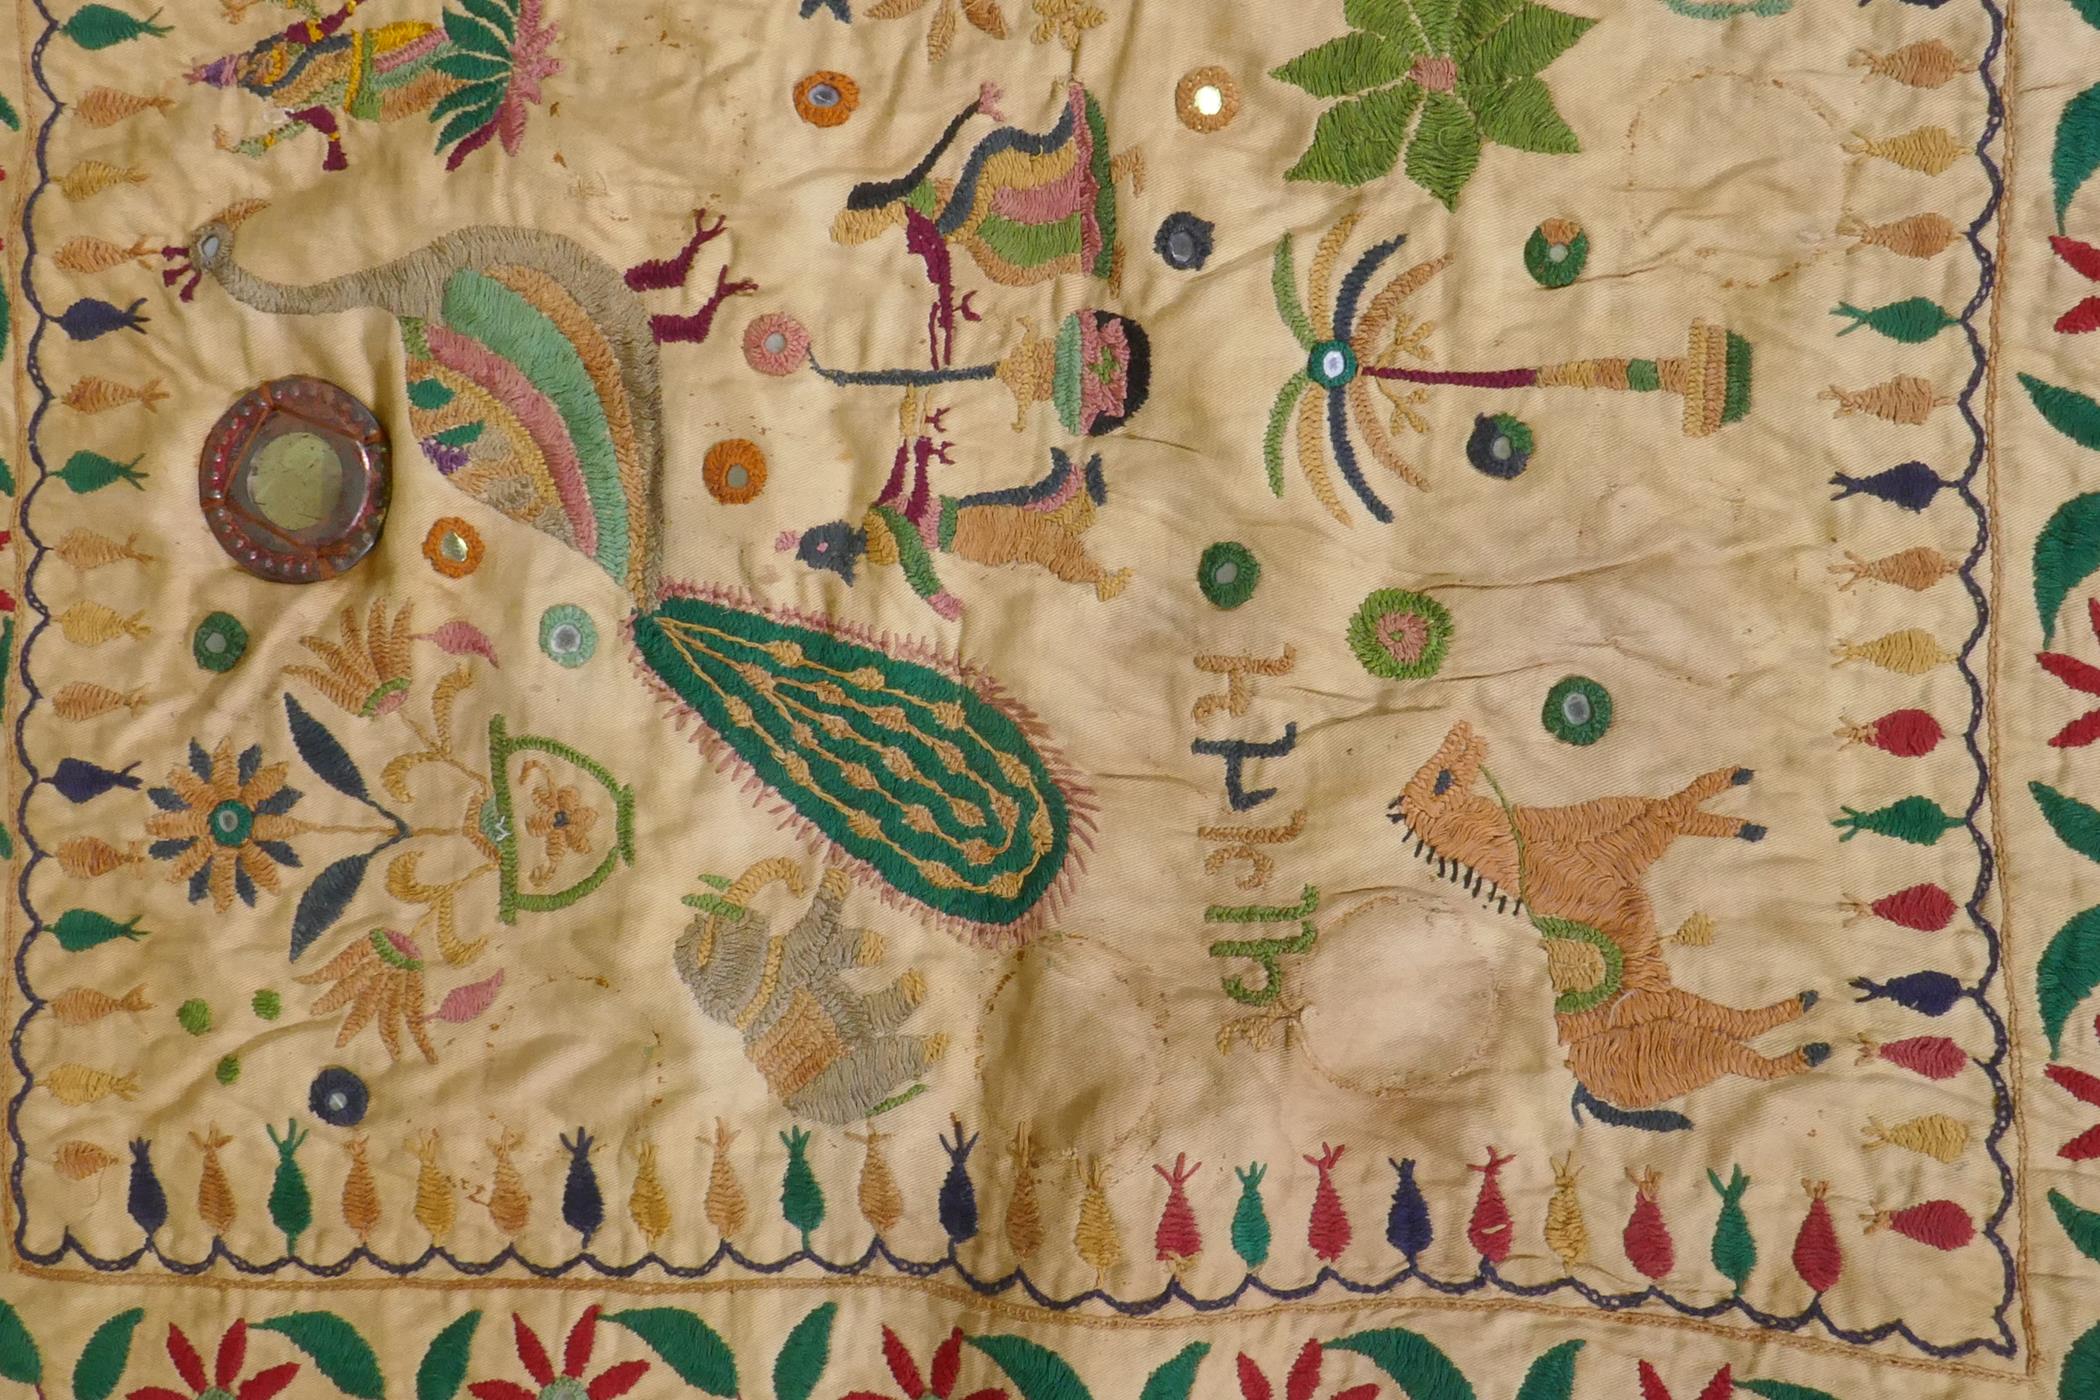 A C19th Indian embroidered wall hanging decorated with depictions of Ganesh, peacocks, elephants, - Image 4 of 9